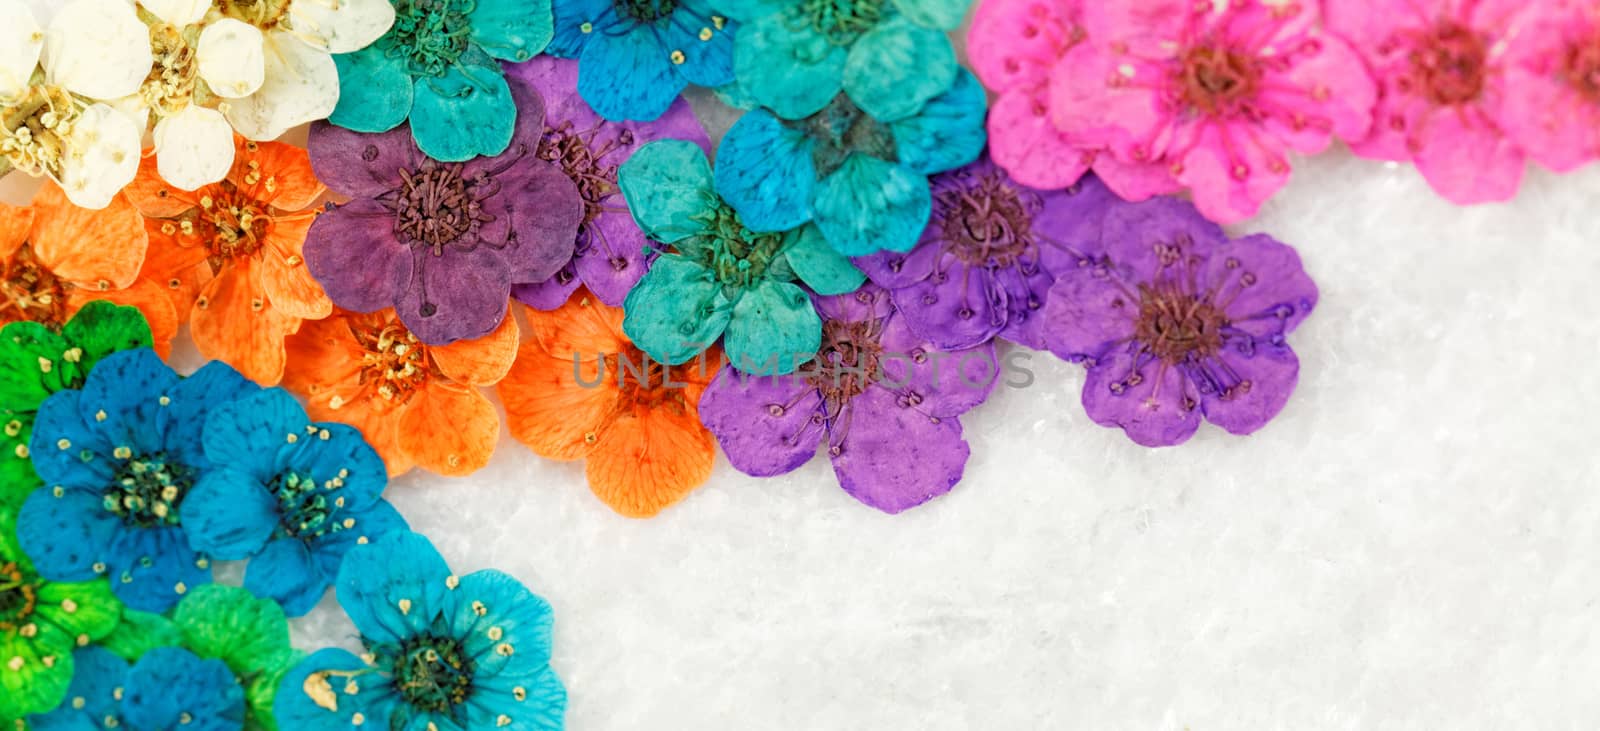 Colorful dried spring flowers by Nneirda